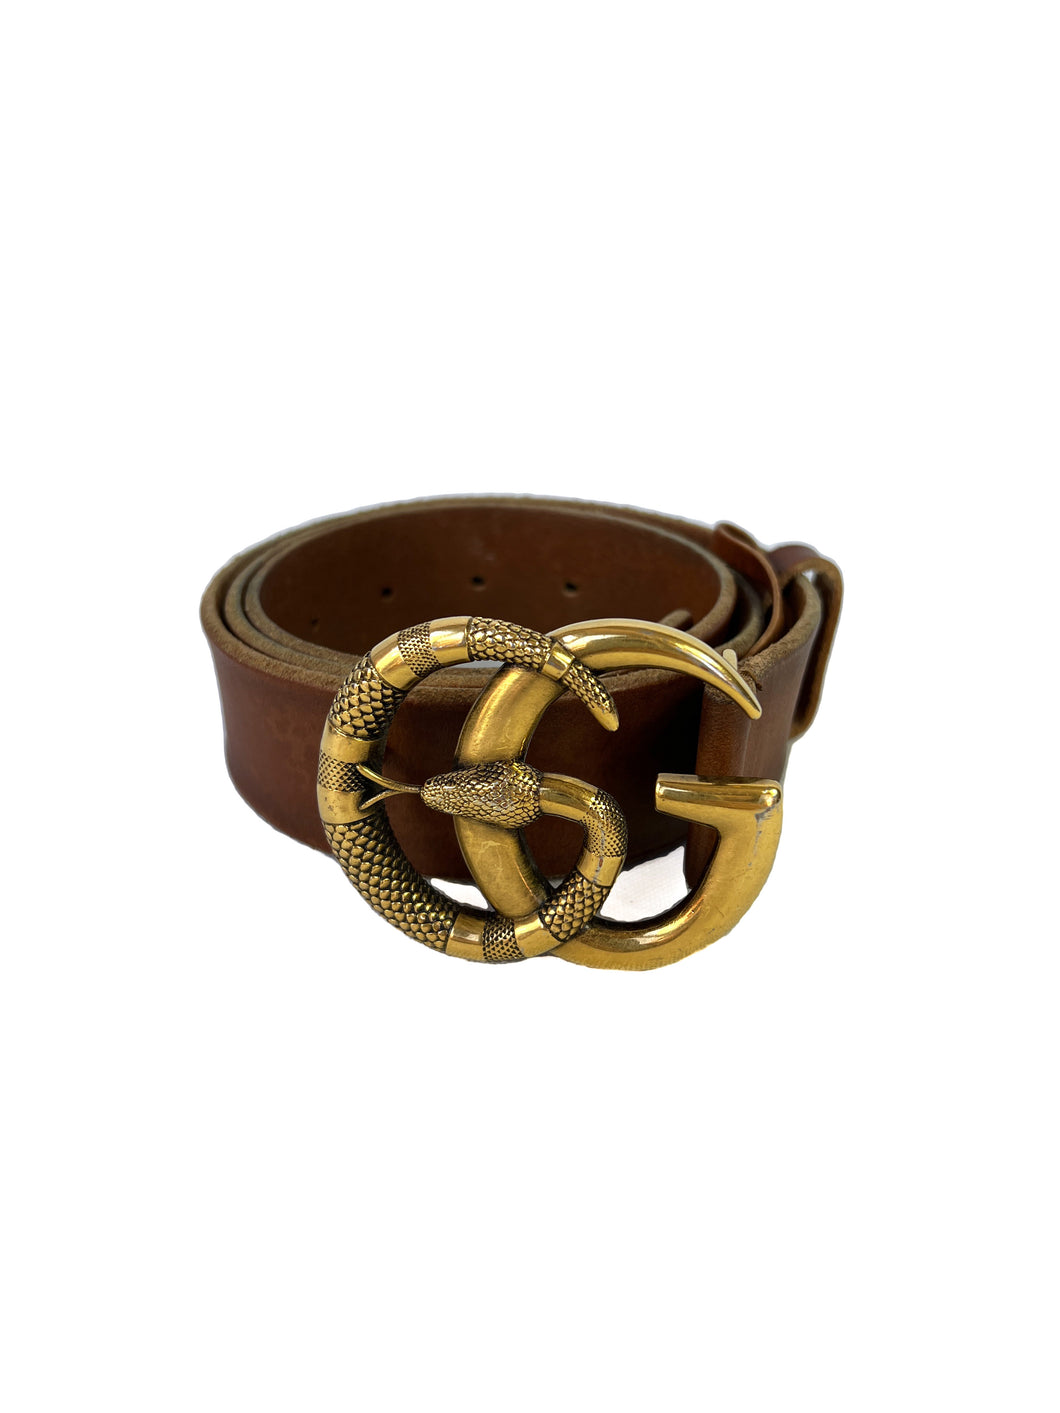 Gucci brown leather double G snake belt size 90